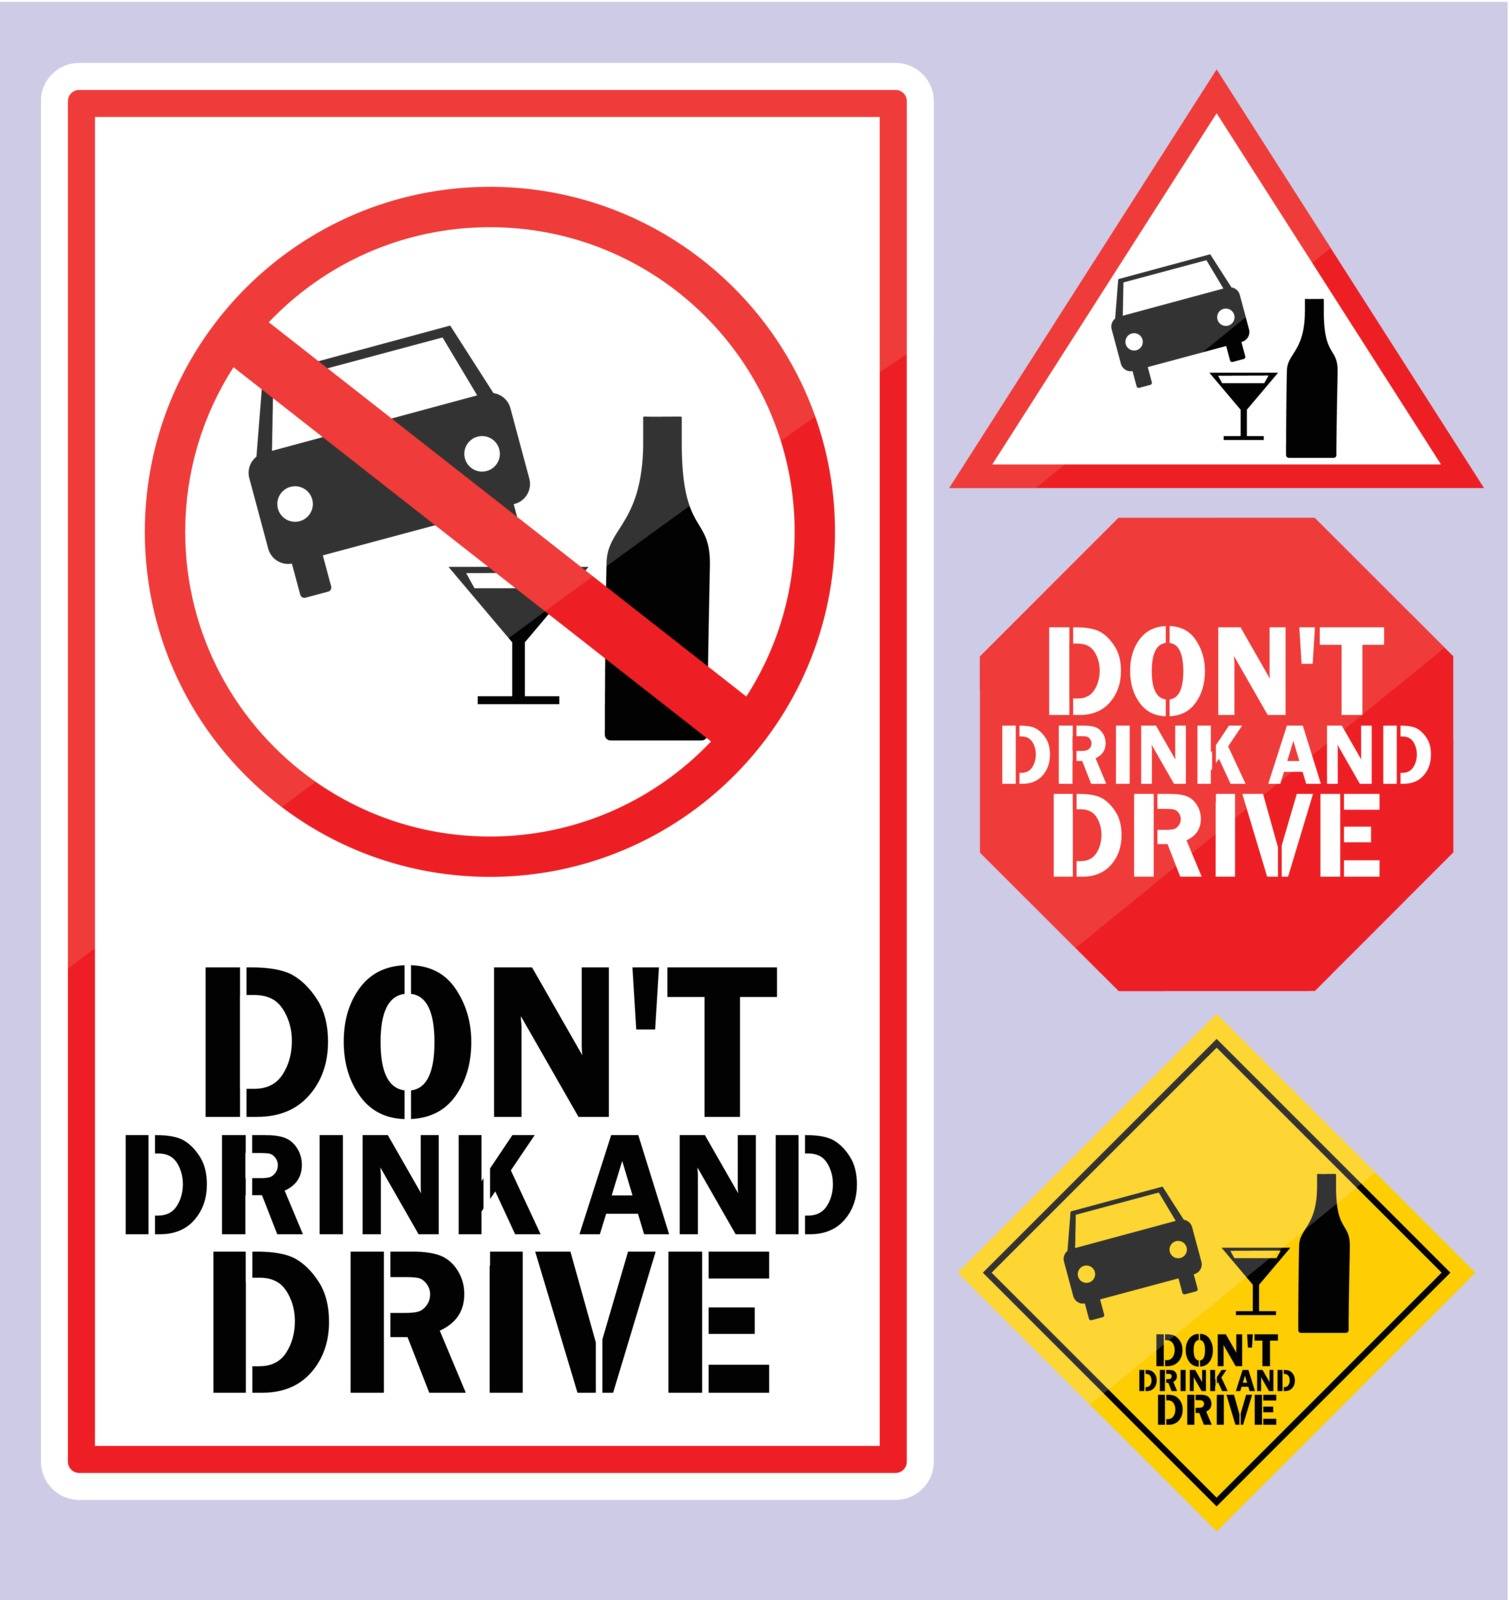 Do not drink and drive by robin2